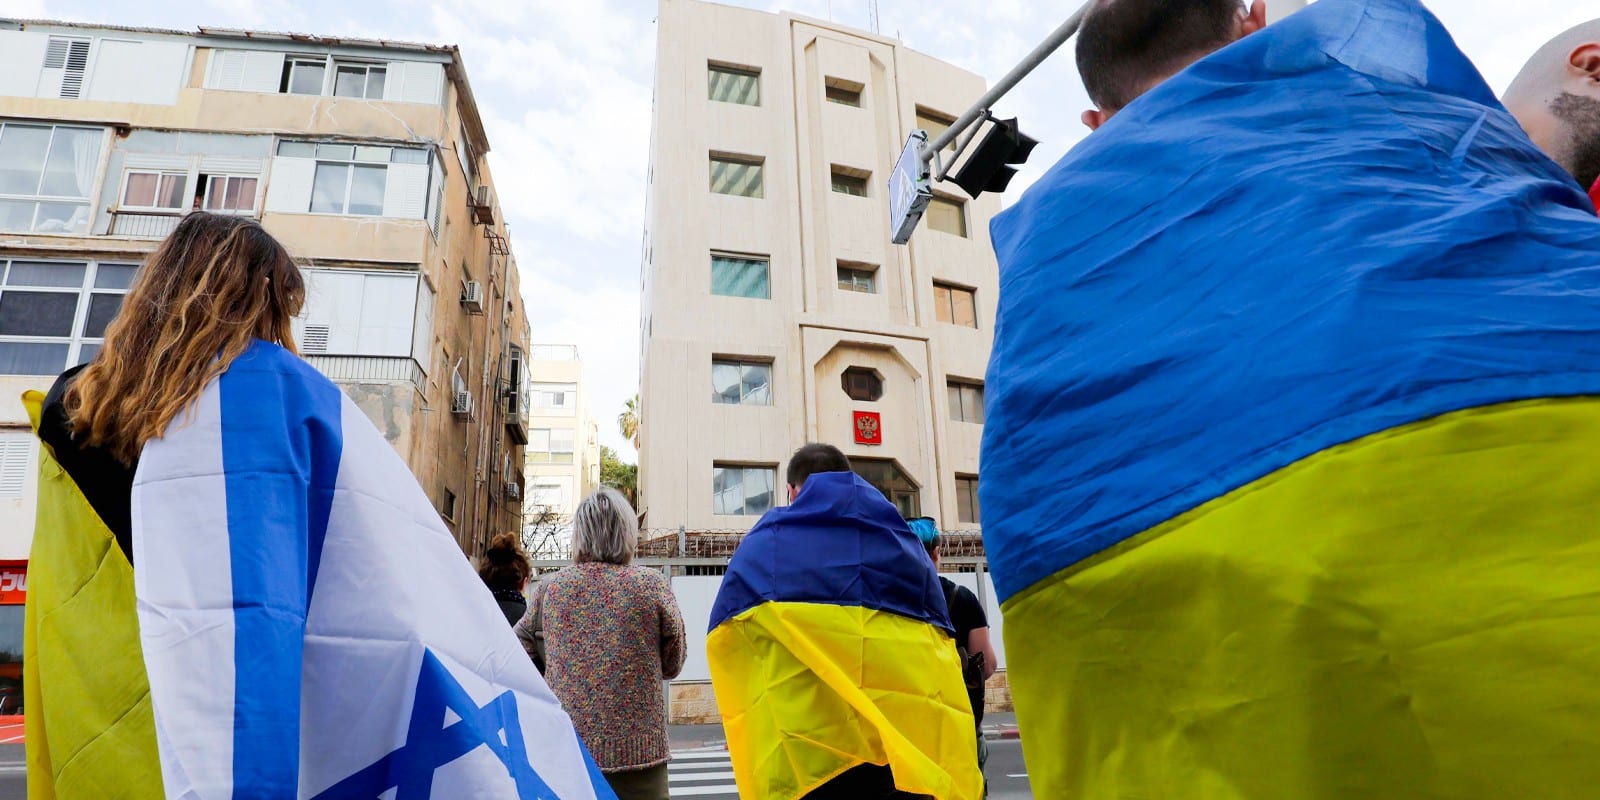 Israelis and Ukrainians living in Israel carry placards flags during a protest against Russia's invasion of Ukraine, in front of the Russian Embassy in Tel Aviv, Israel on February 24, 2022.